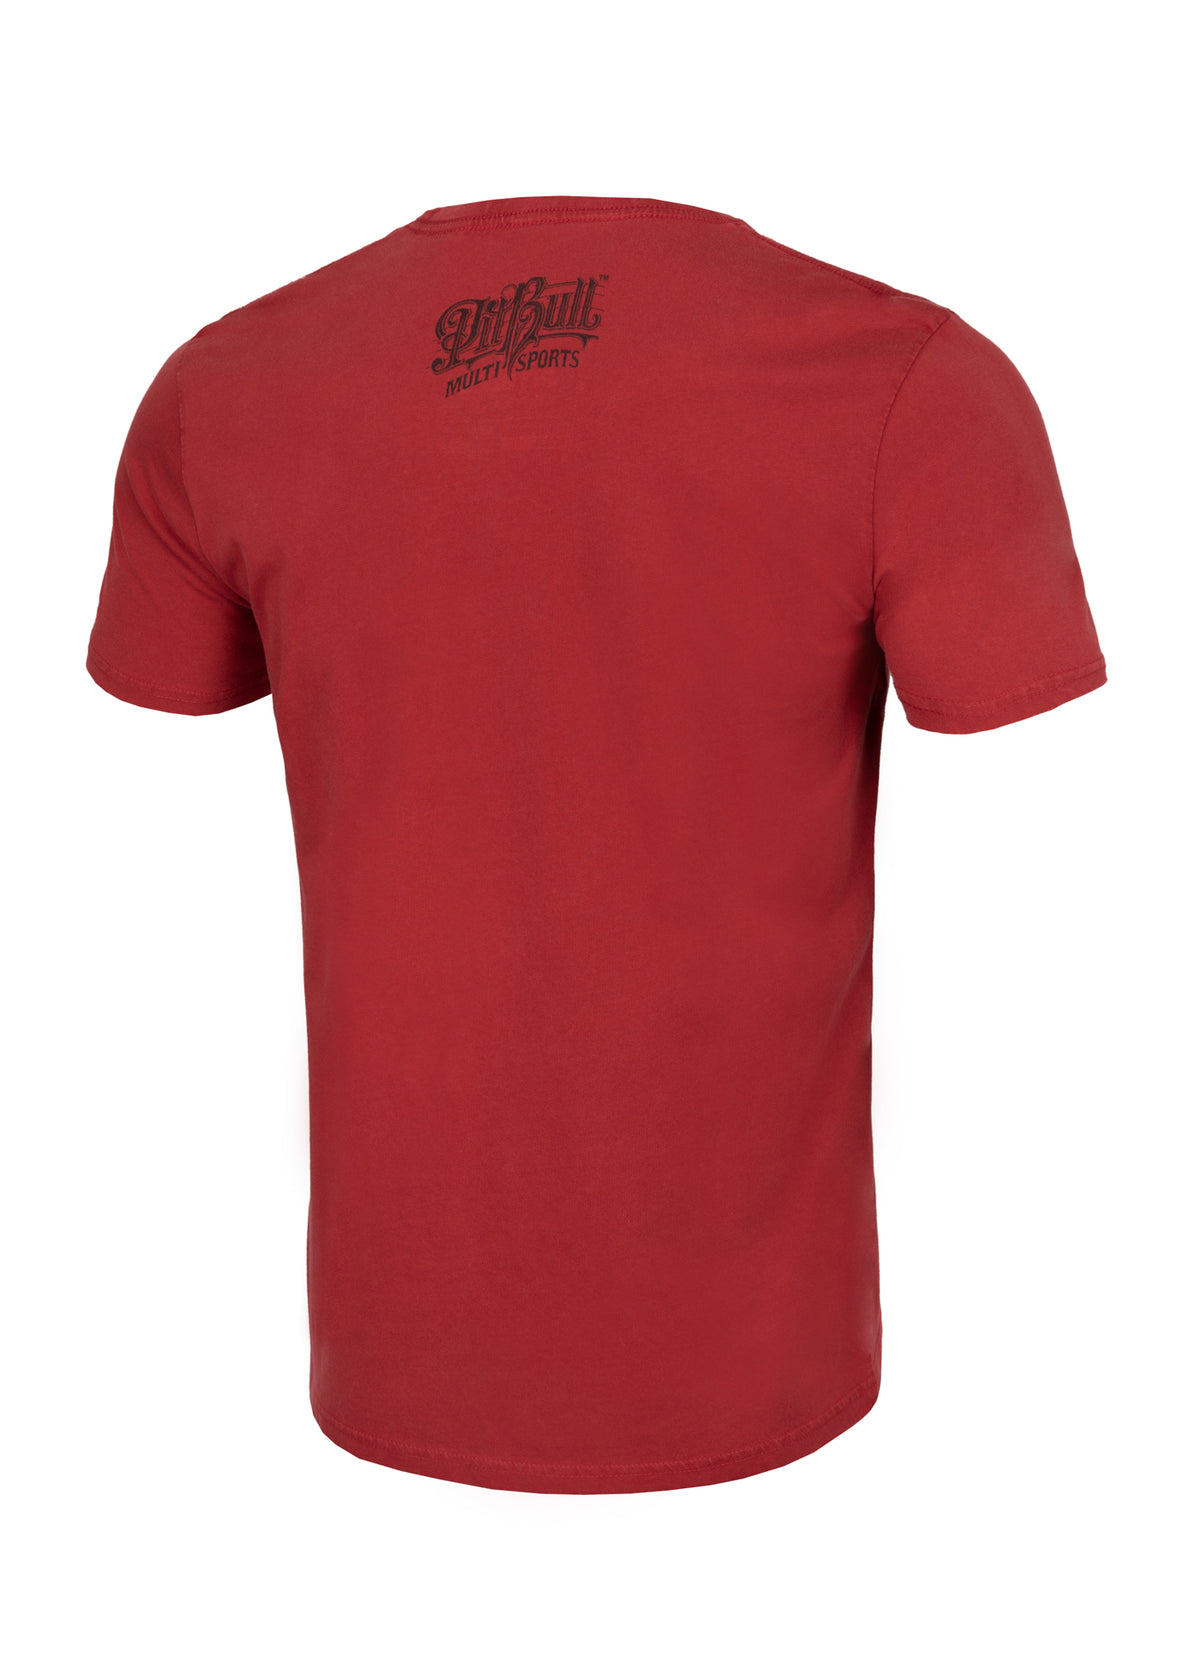 VINTAGE BOXING Middleweight  Burgundy T-shirt.